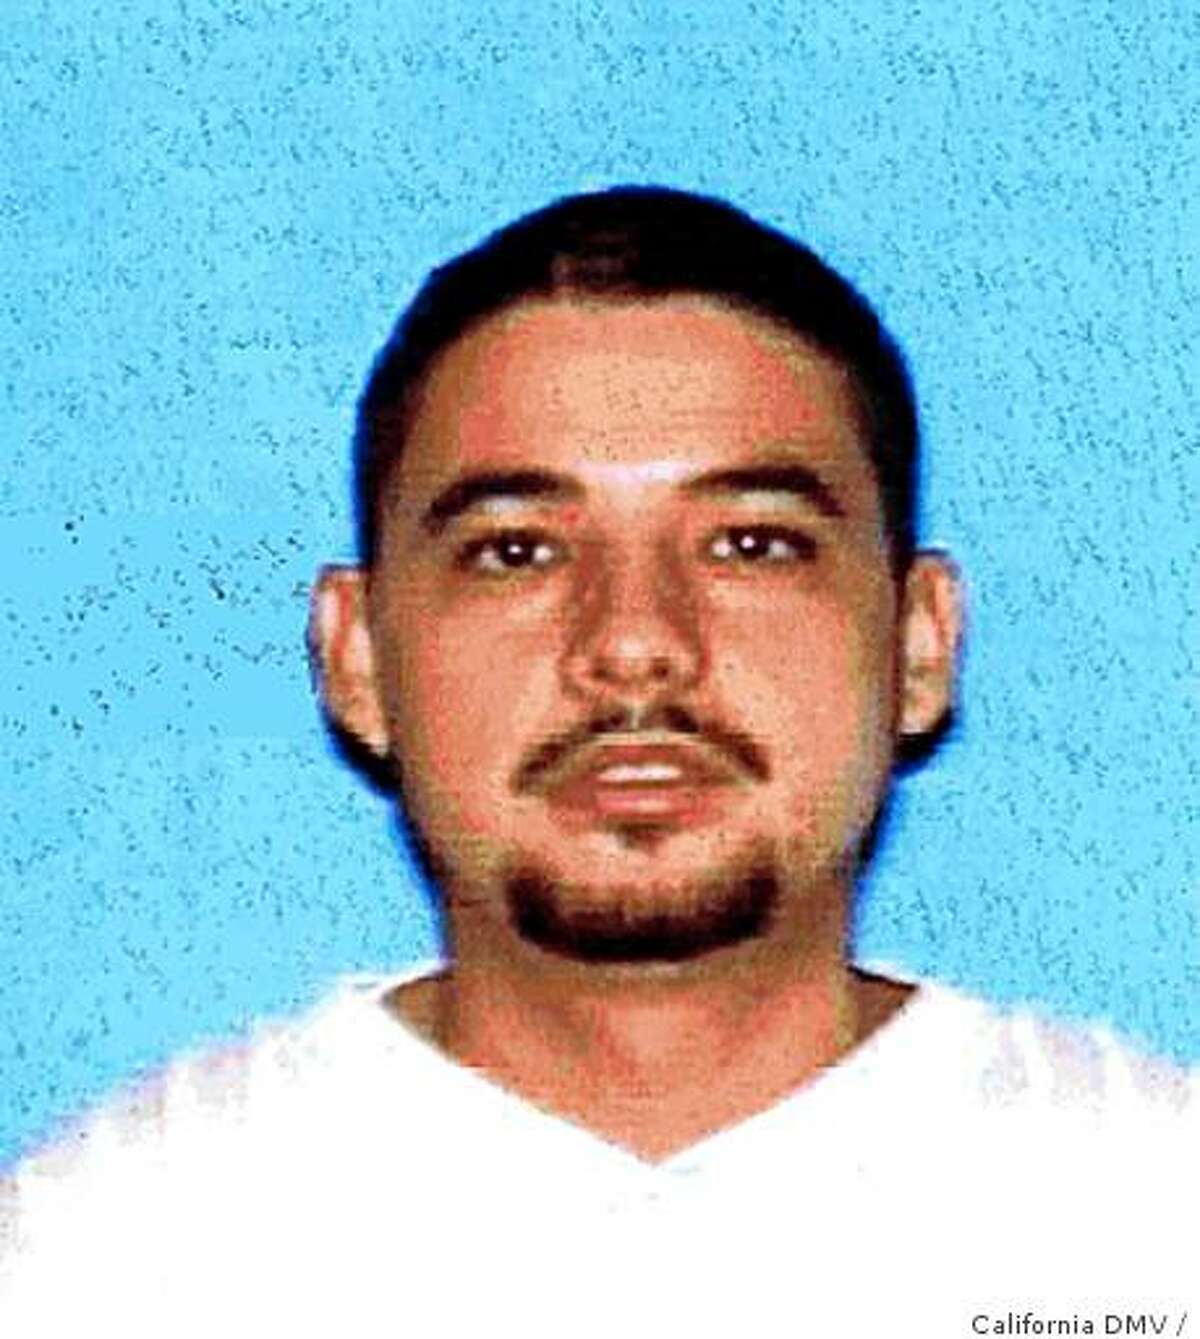 A California DMV photo of Sergio Casian Aguiar, who was shot and killed Saturday night, June14, 2008 by police officers after he was seen killing a child just outside Turlock, Calif.